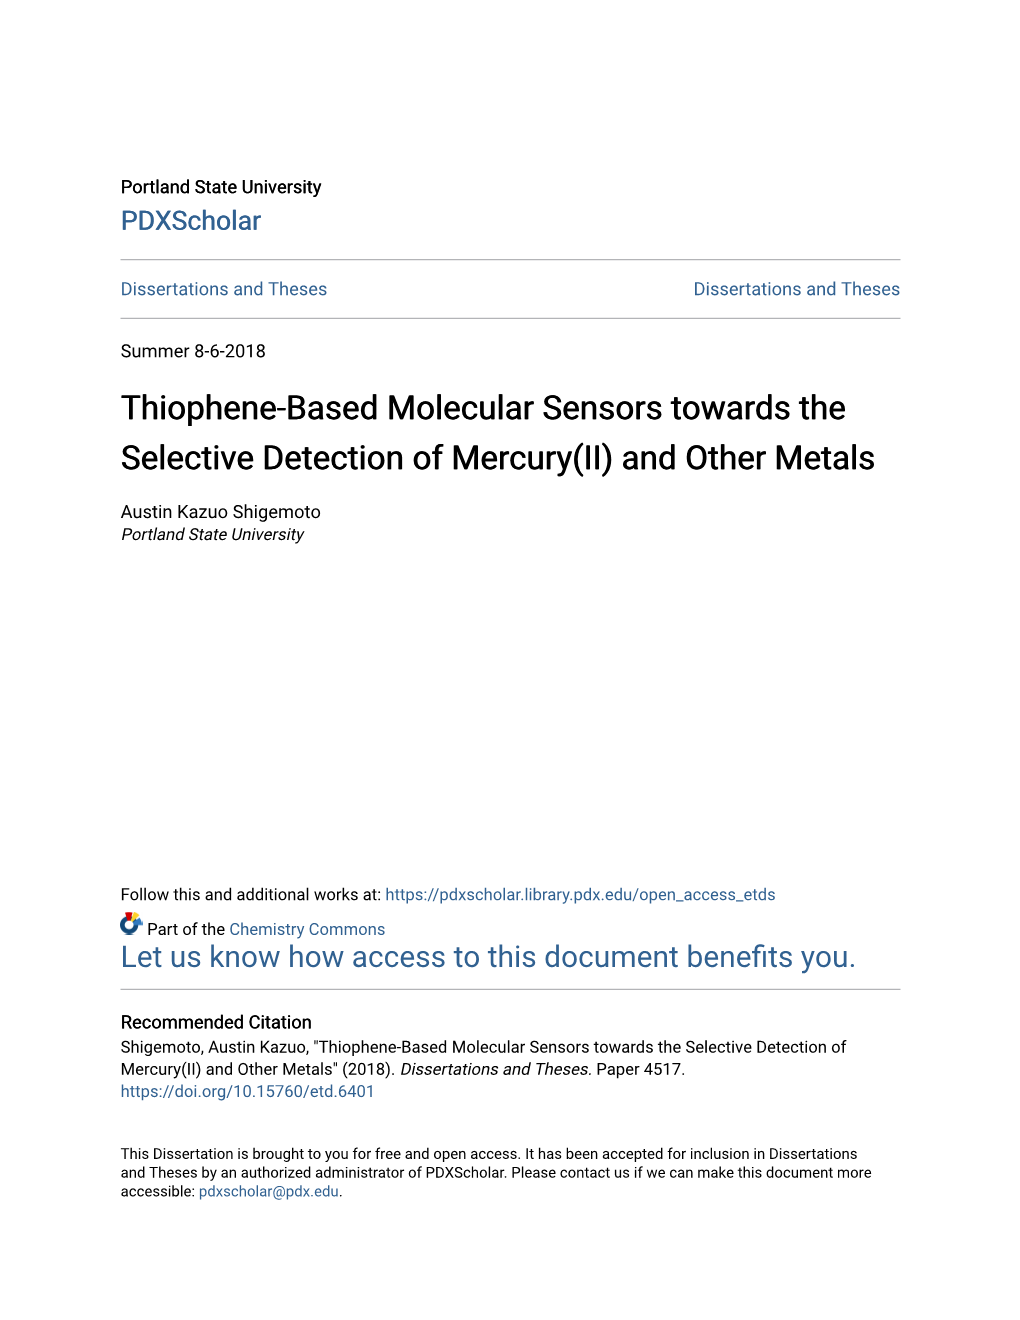 Thiophene-Based Molecular Sensors Towards the Selective Detection of Mercury(II) and Other Metals